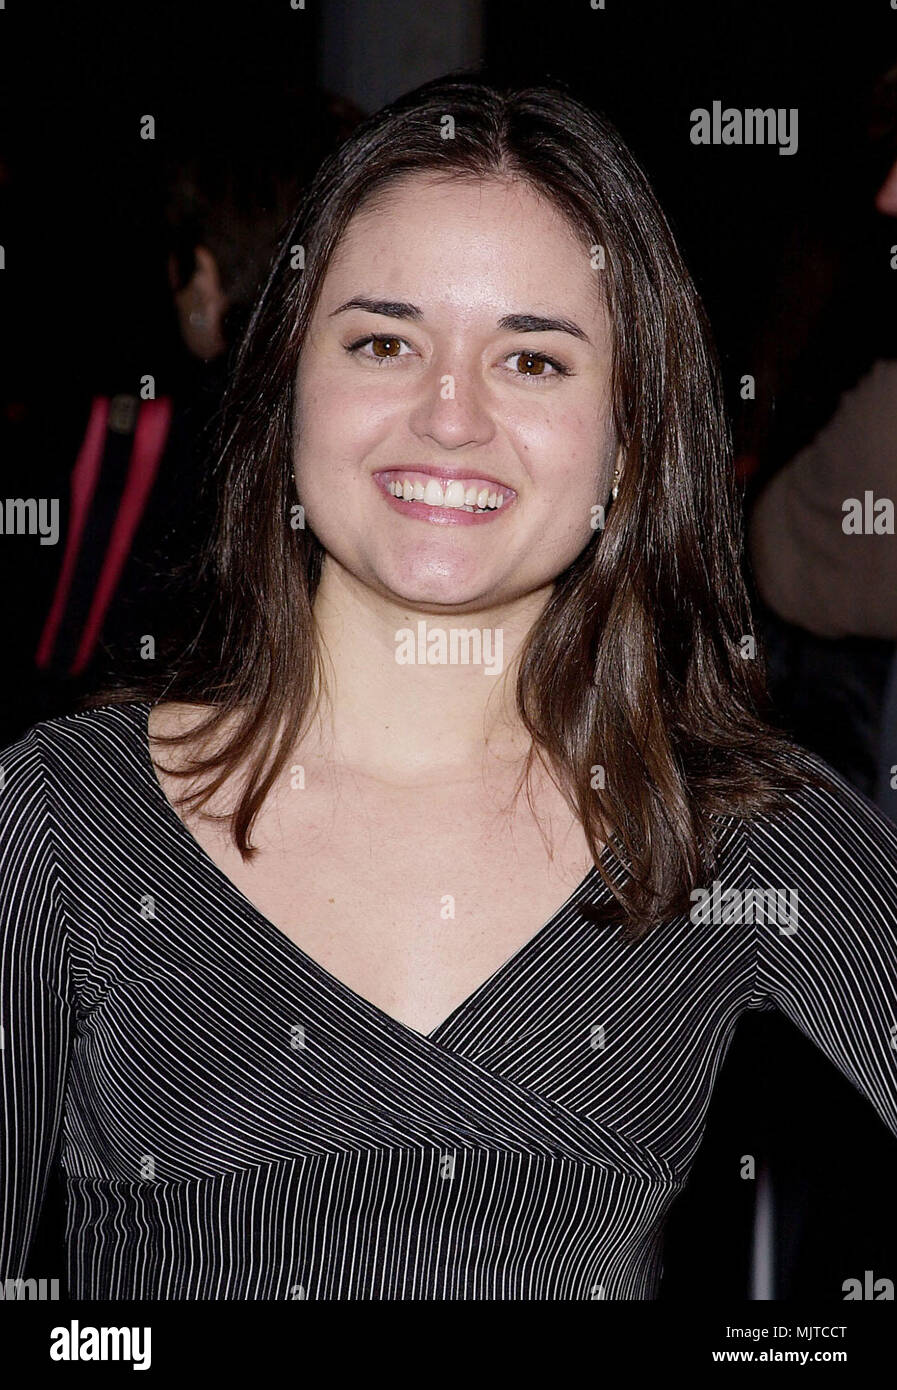 Nov 06, 2000; Los Angeles, CA, USA;  'Red Planet 1e'  was held at the Westwood  Village Theatre in Los Angeles Danica McKellar  McKellar.Danica.09.JPGMcKellar.Danica.09  Event in Hollywood Life - California,  Red Carpet Event, Vertical, USA, Film Industry, Celebrities,  Photography, Bestof, Arts Culture and Entertainment, Topix Celebrities fashion /  from the Red Carpet-1994-2000, one person, Vertical, Best of, Hollywood Life, Event in Hollywood Life - California,  Red Carpet and backstage, USA, Film Industry, Celebrities,  movie celebrities, TV celebrities, Music celebrities, Photography, Bes Stock Photo